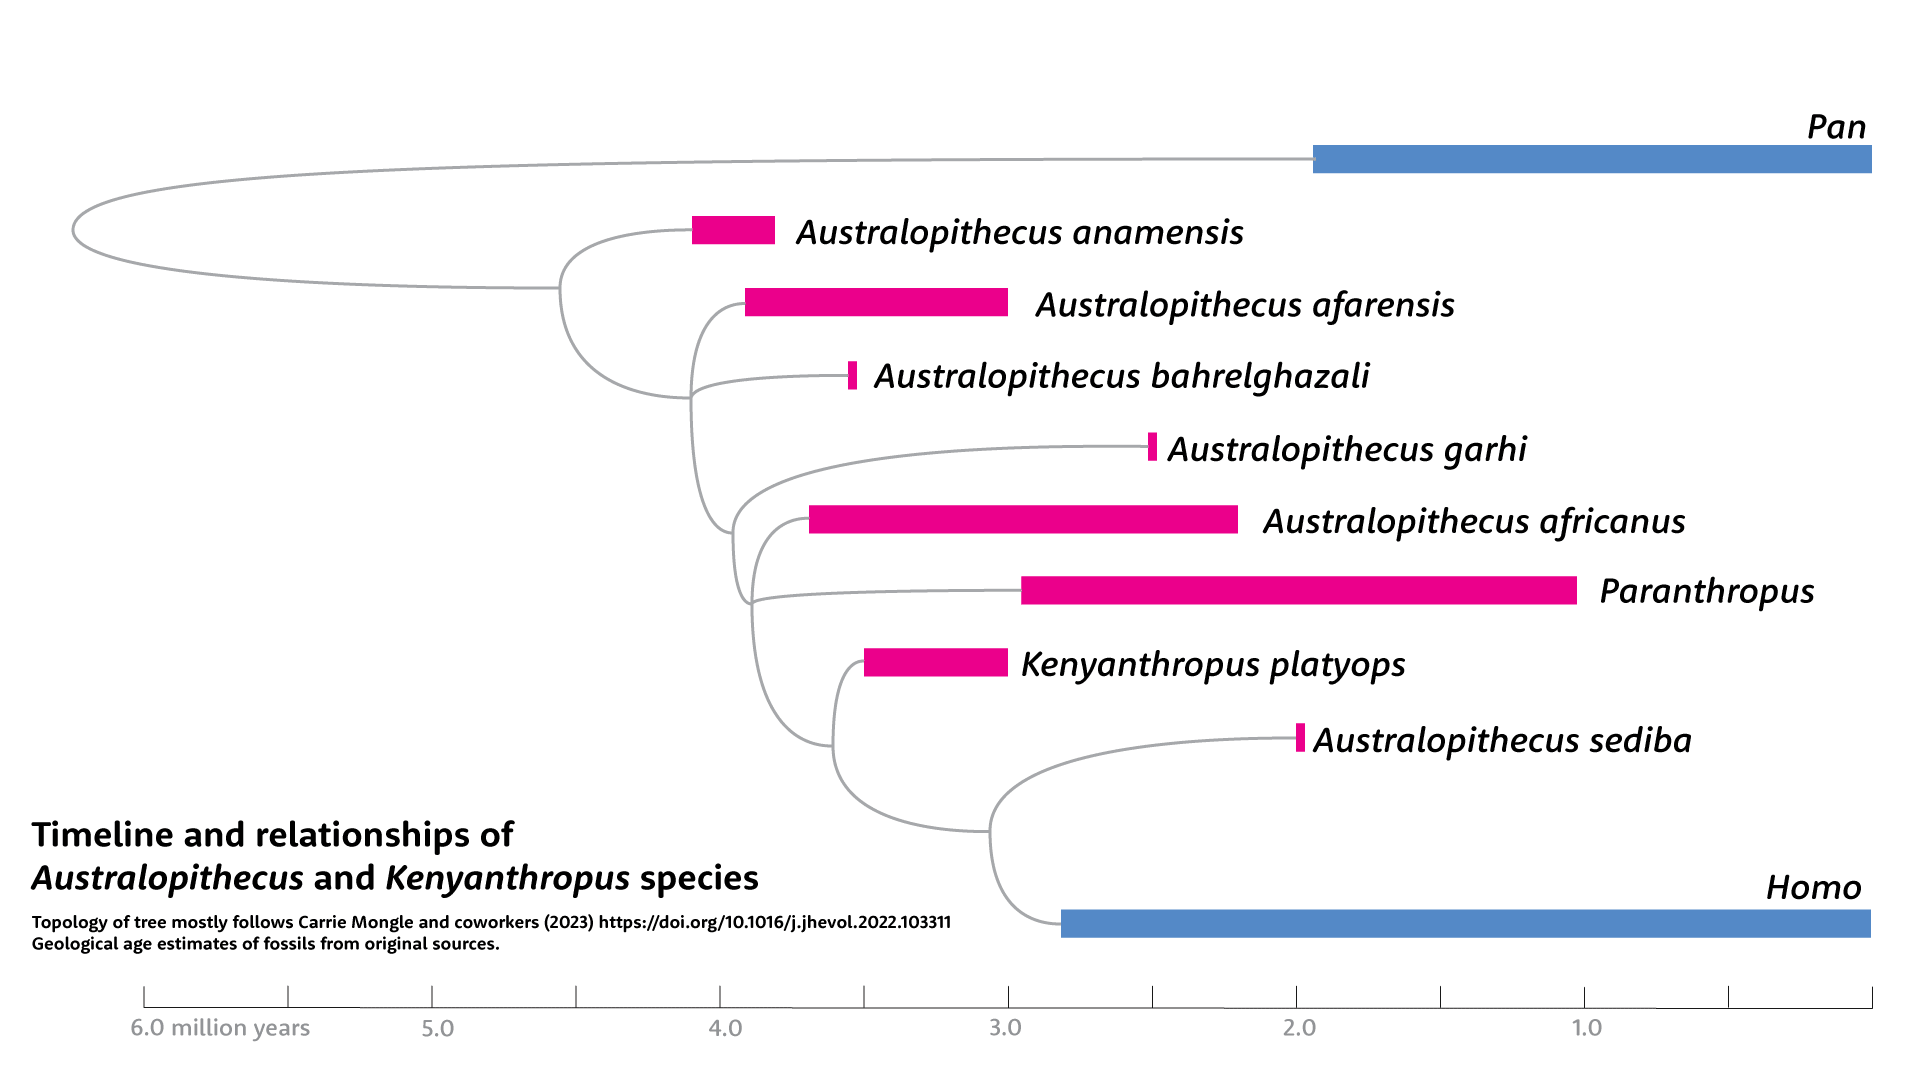 Timeline and relationships of Australopithecus and Kenyanthropus species